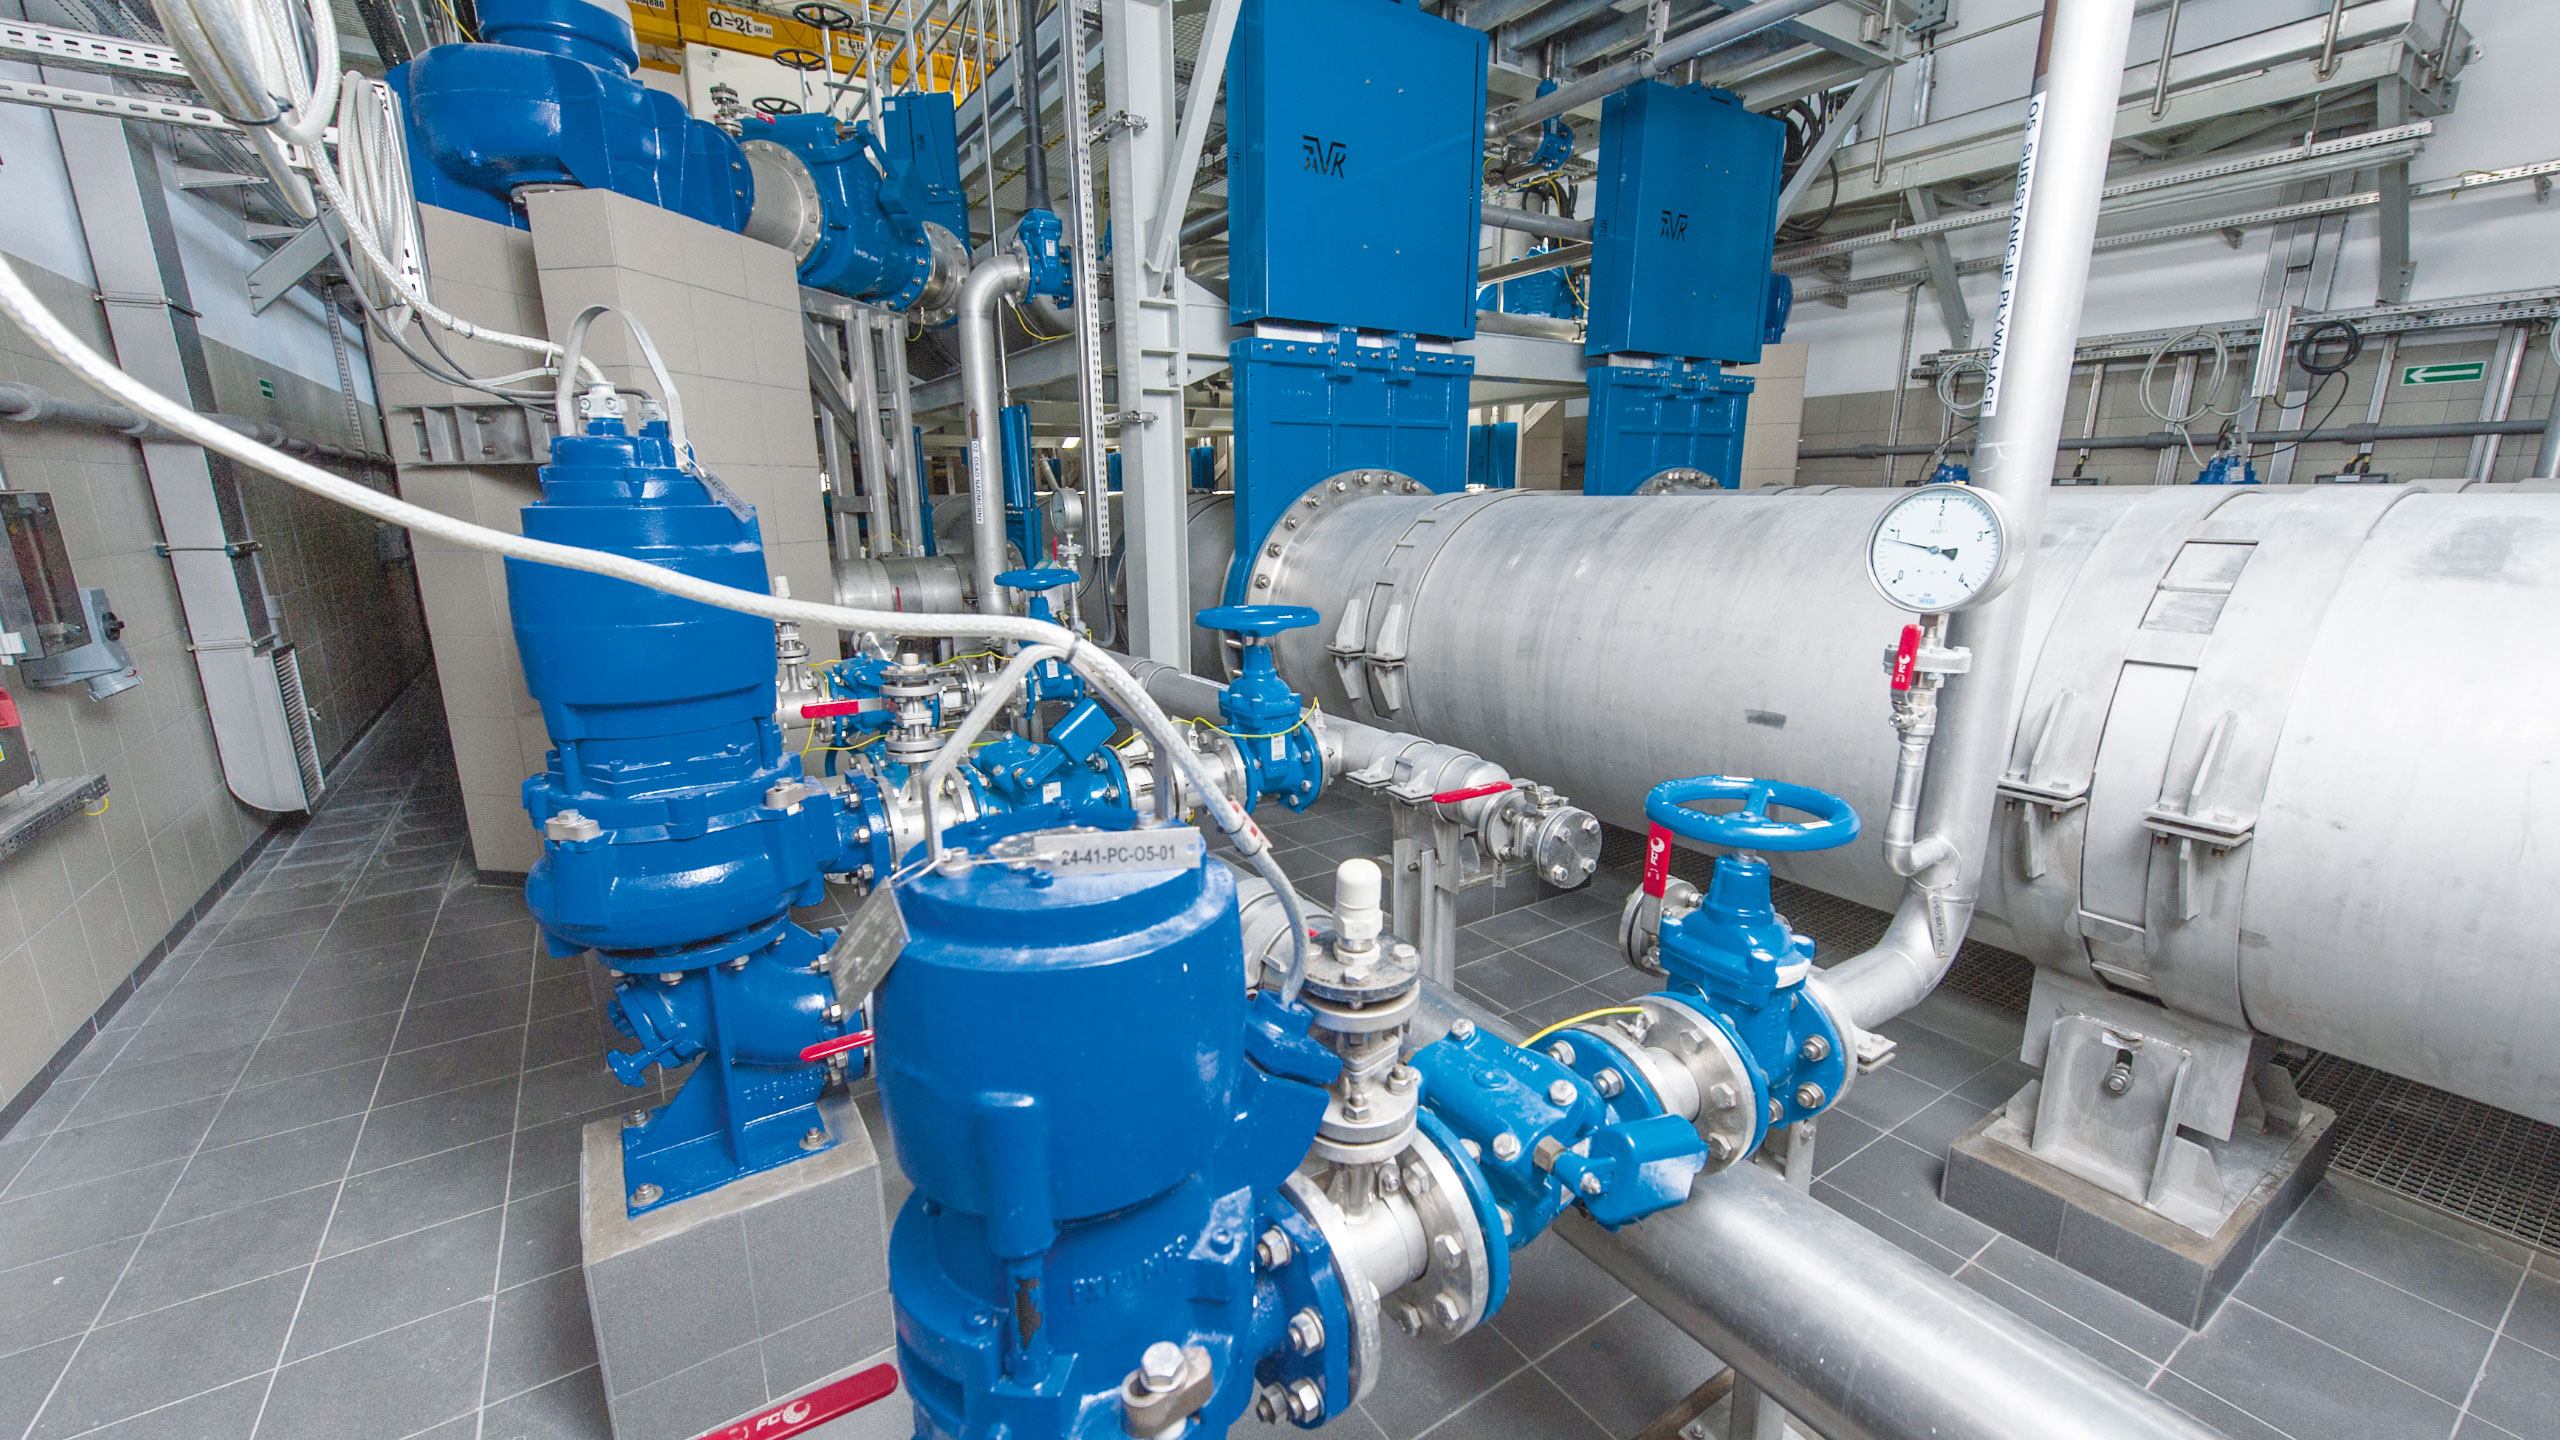 Knife gate valves from AVK installed at Czajka wastewater treatment plant in Poland